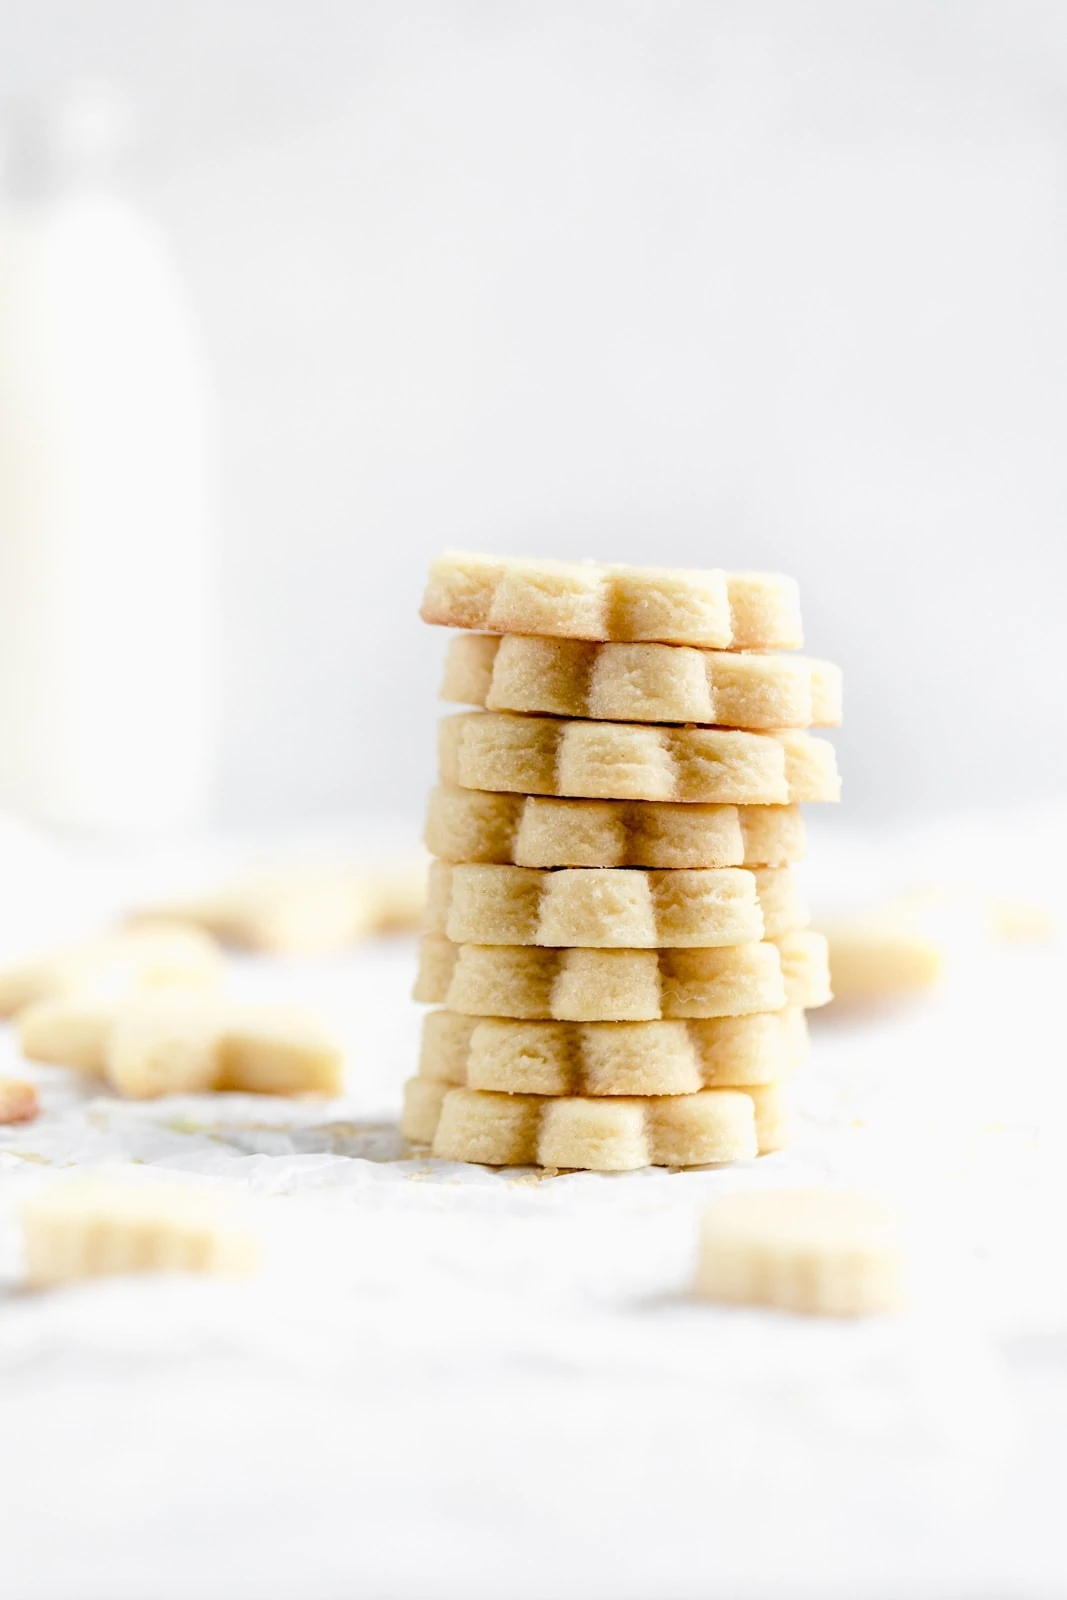 Get back to basics with these perfect cut out sugar cookie. Dense, chewy, and melt in your mouth buttery, we promise you won't be disappointed!